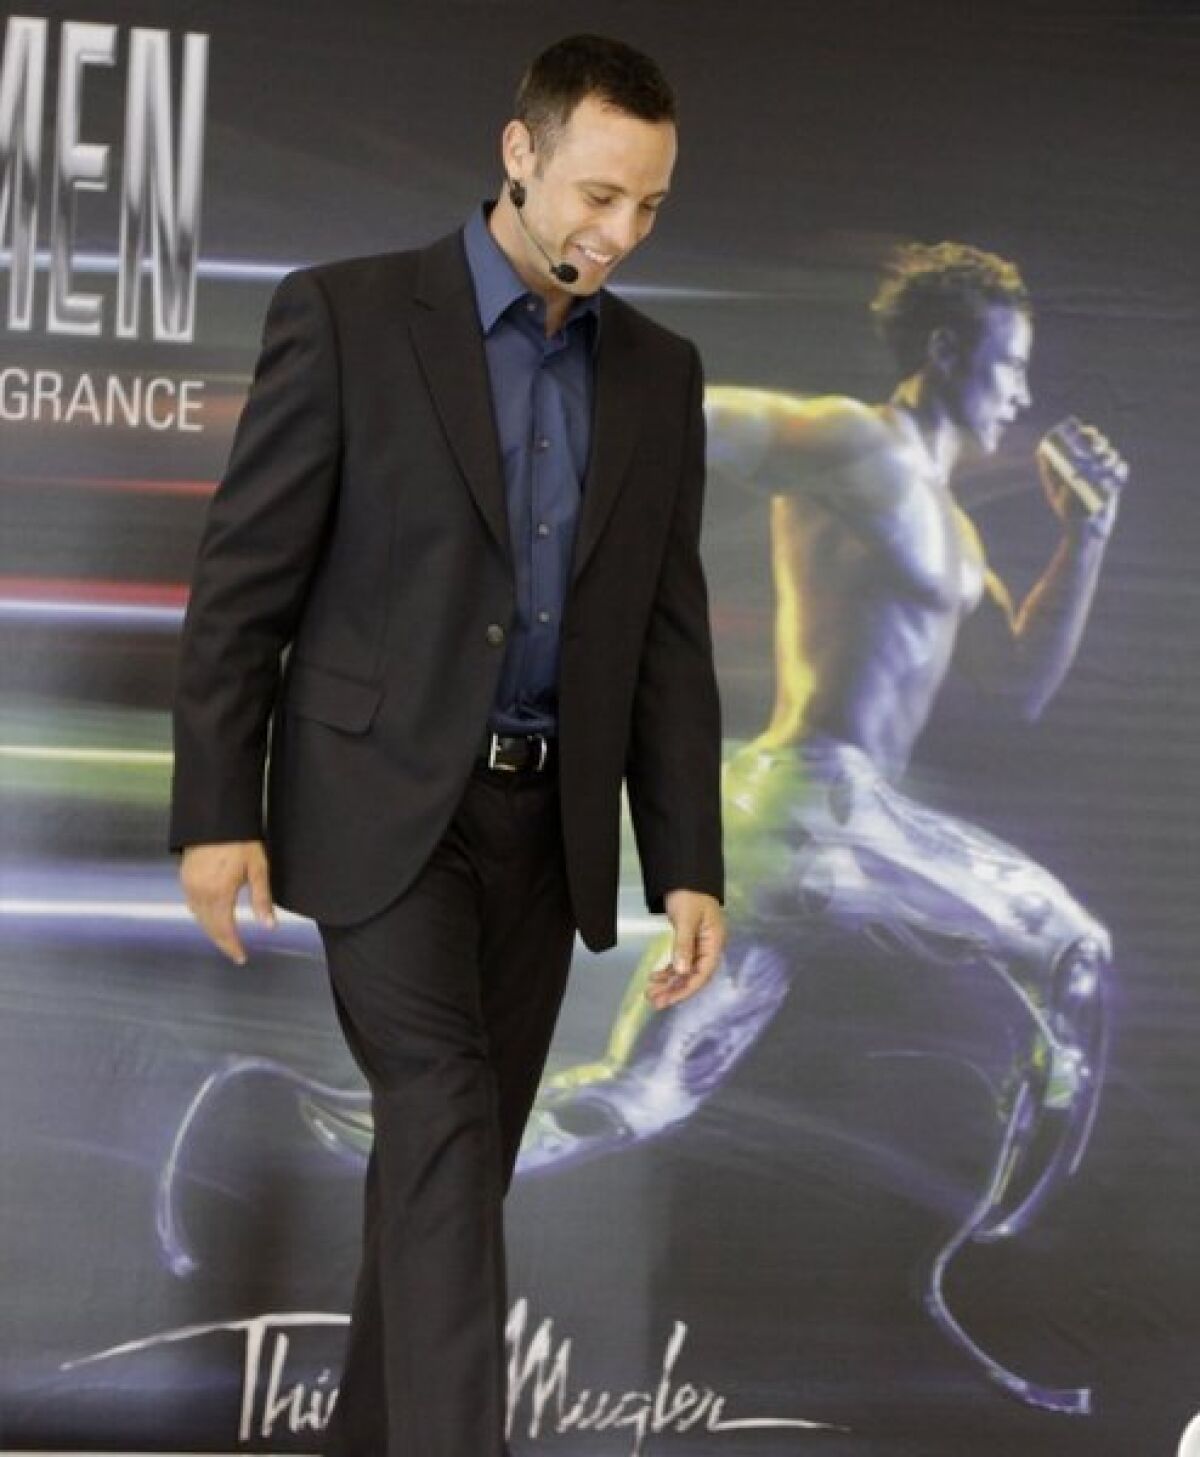 Oscar Pistorius attends the 2011 launch of French designer Thierry Mugler's fragrance A-Men in Johannesburg.